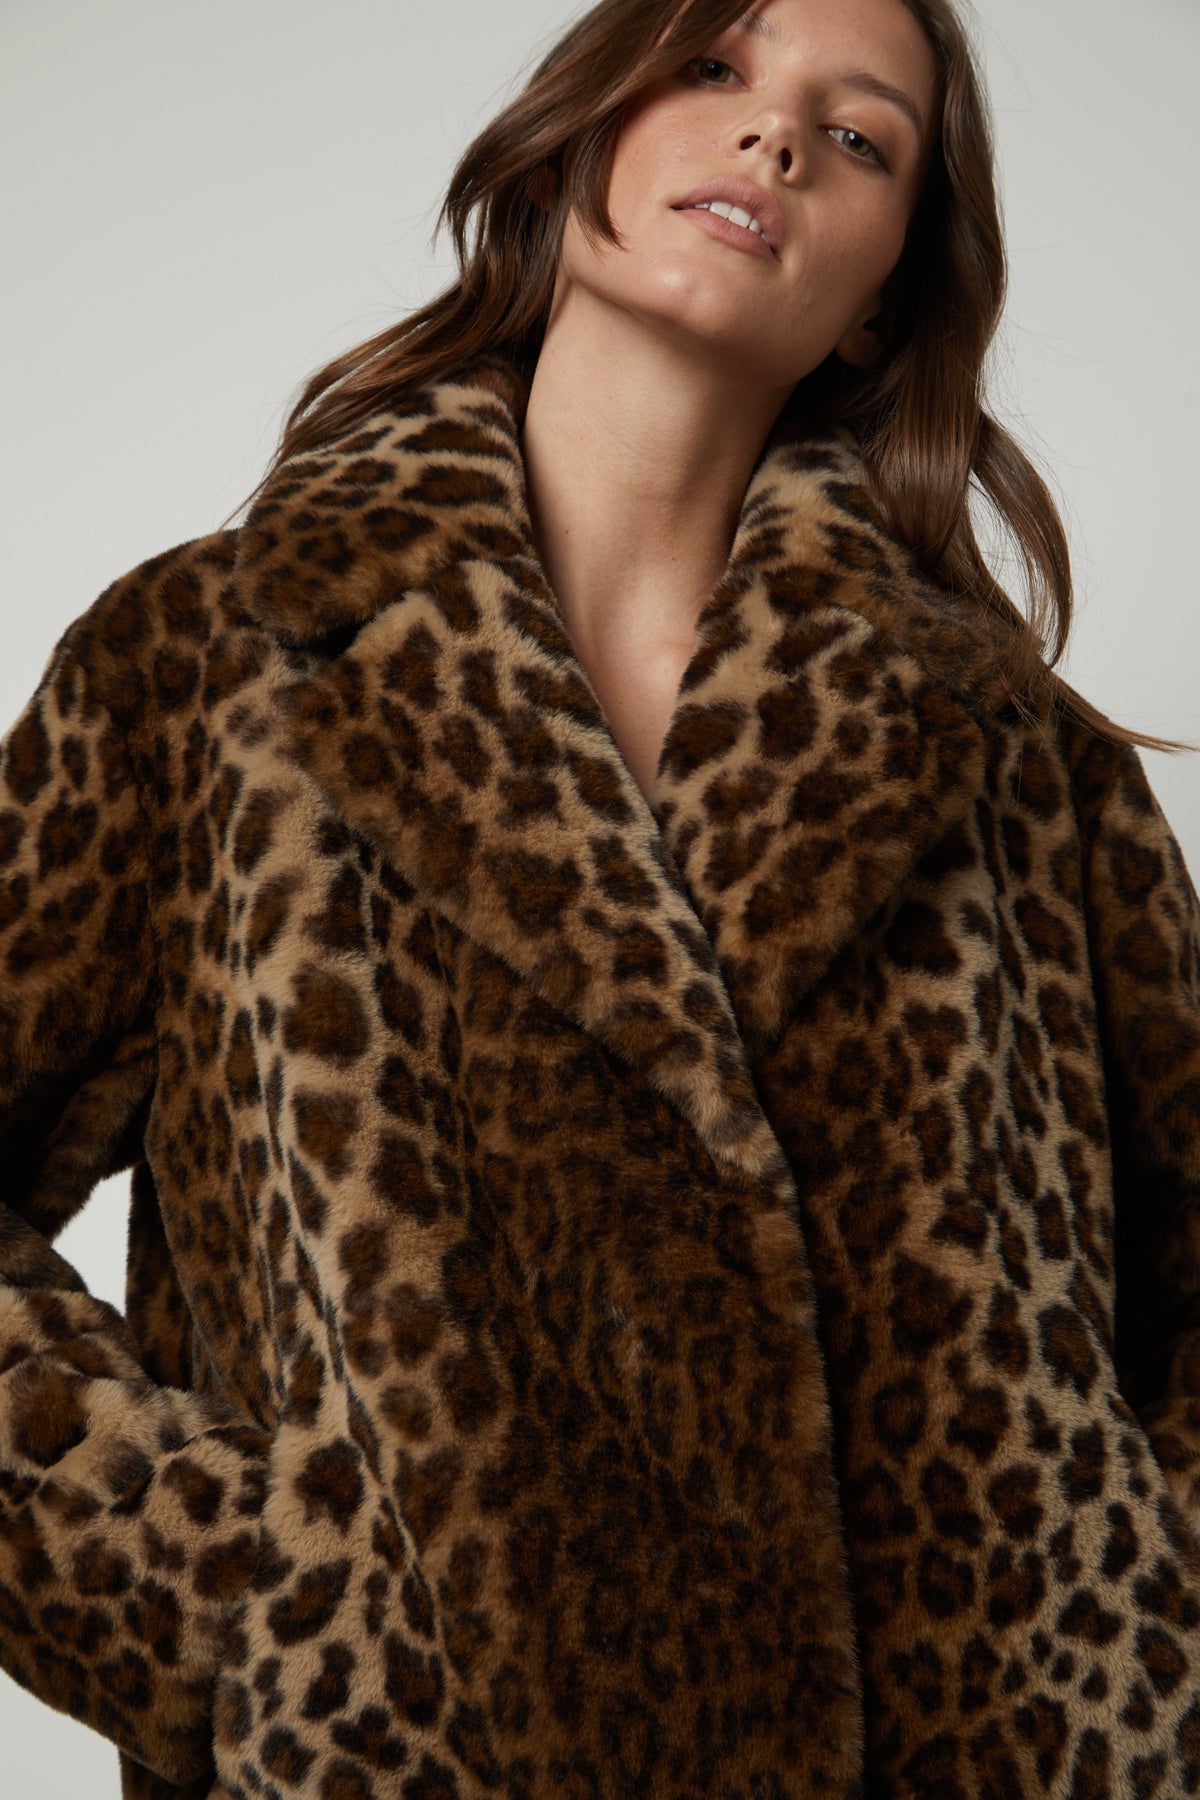   A woman wearing a AMANI LEOPARD LUX FAUX FUR JACKET by Velvet by Graham & Spencer. 